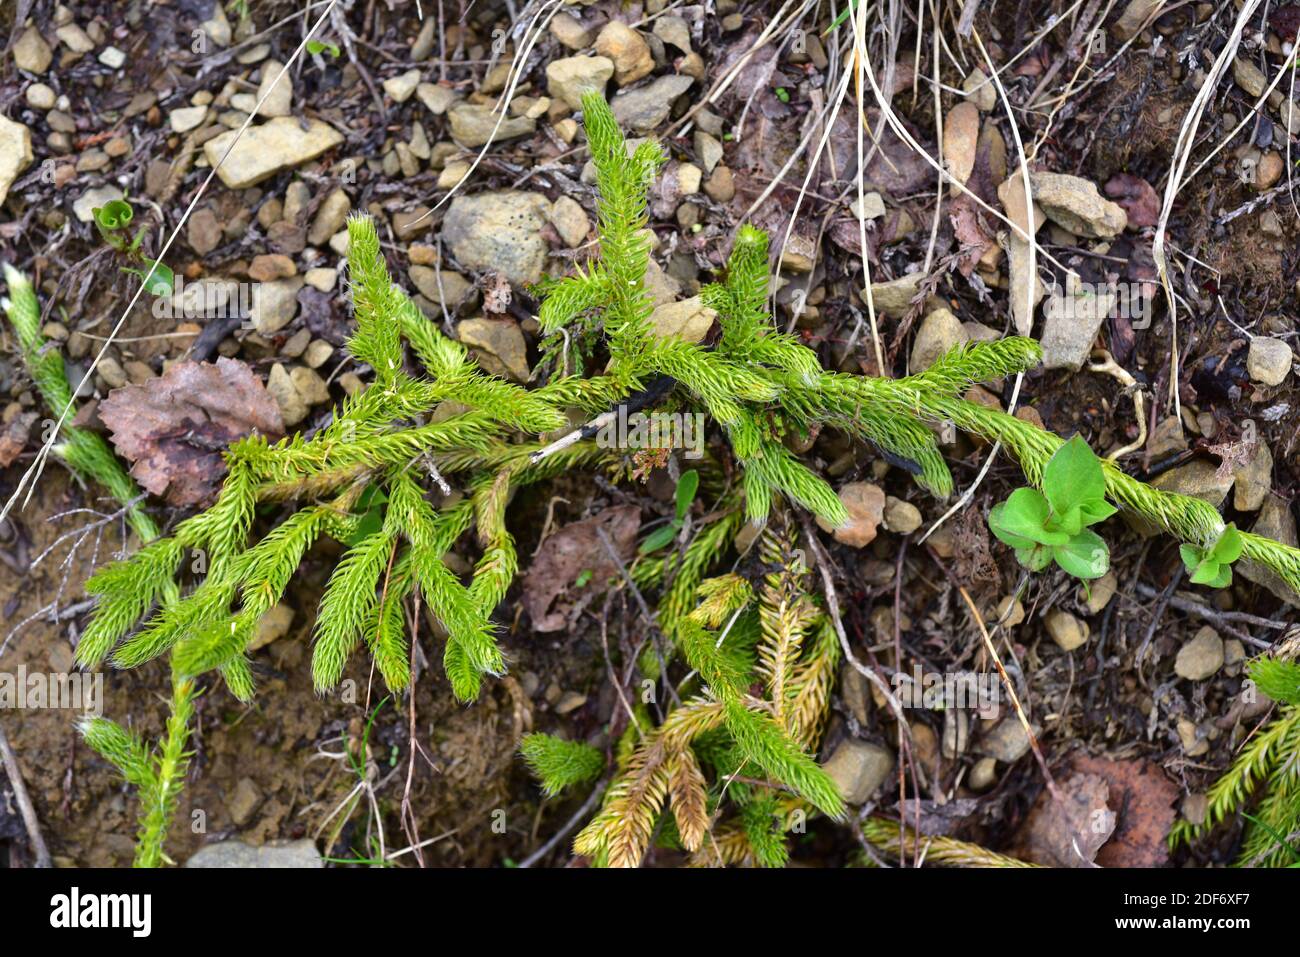 Club moss or gound pine (Lycopodium clavatum) is a vascular plant native to Northern Hemisphere. This photo was taken in Somiedo Natural Park, Stock Photo